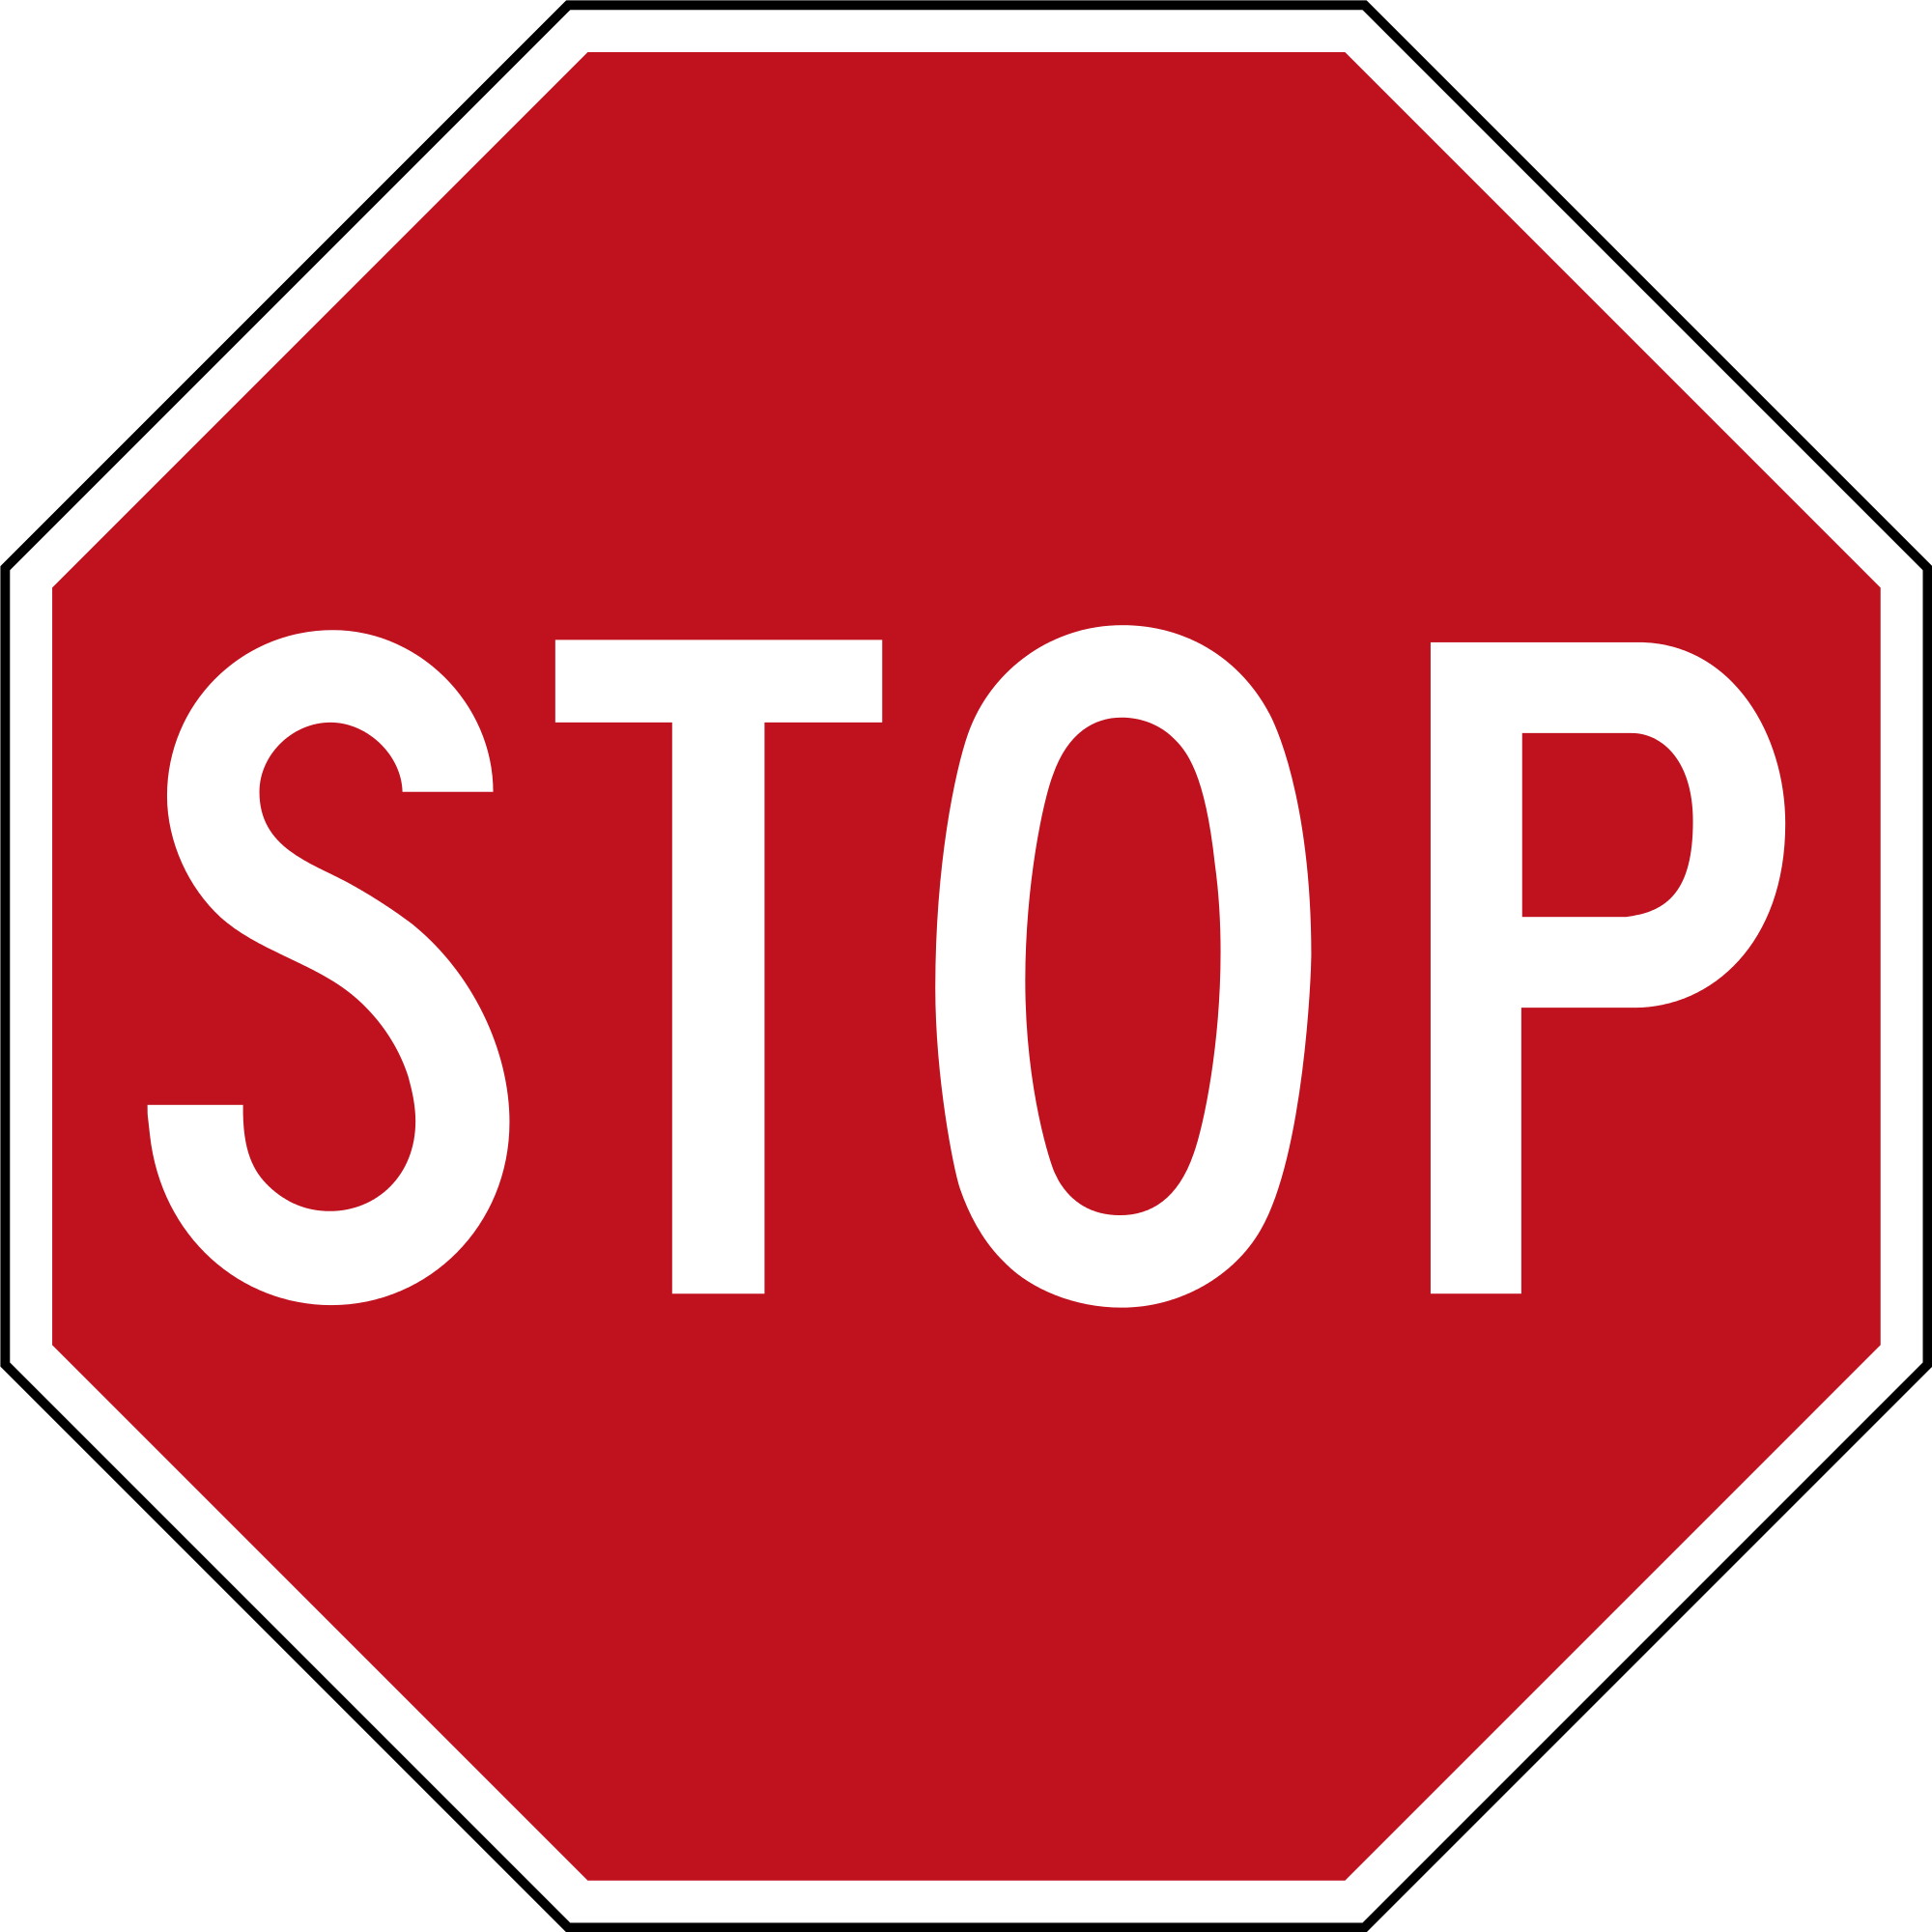 File:Canada Stop sign.svg